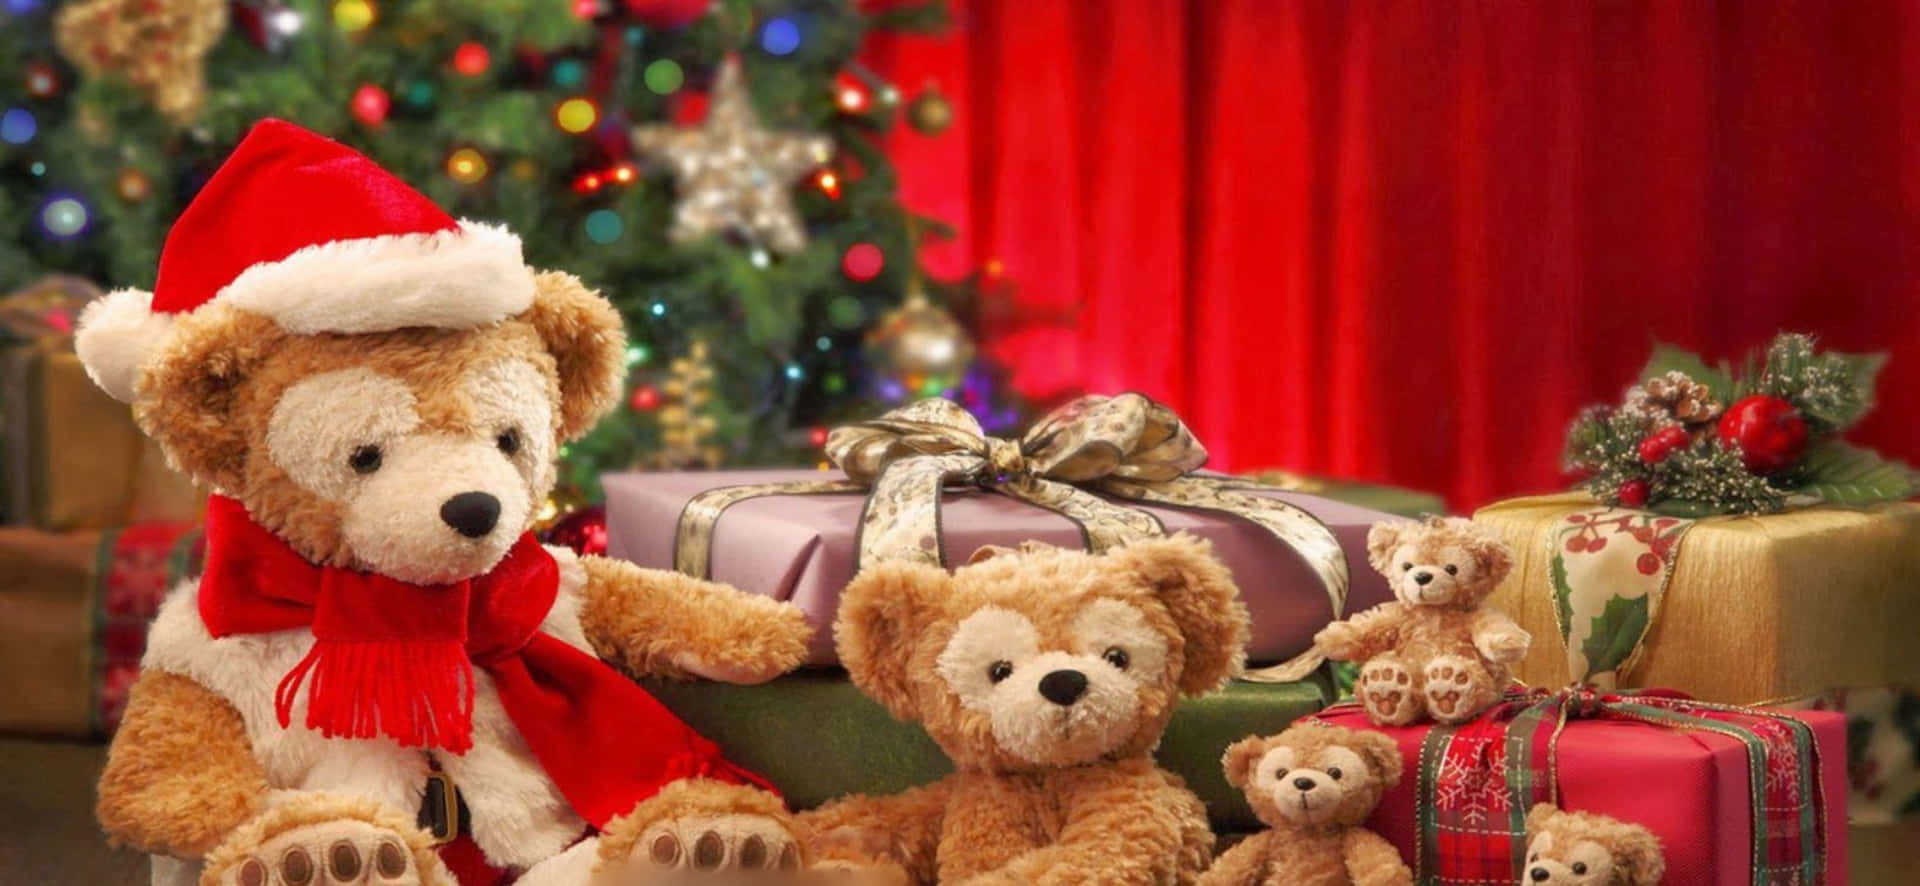 Teddy Bears And Christmas Gifts Picture